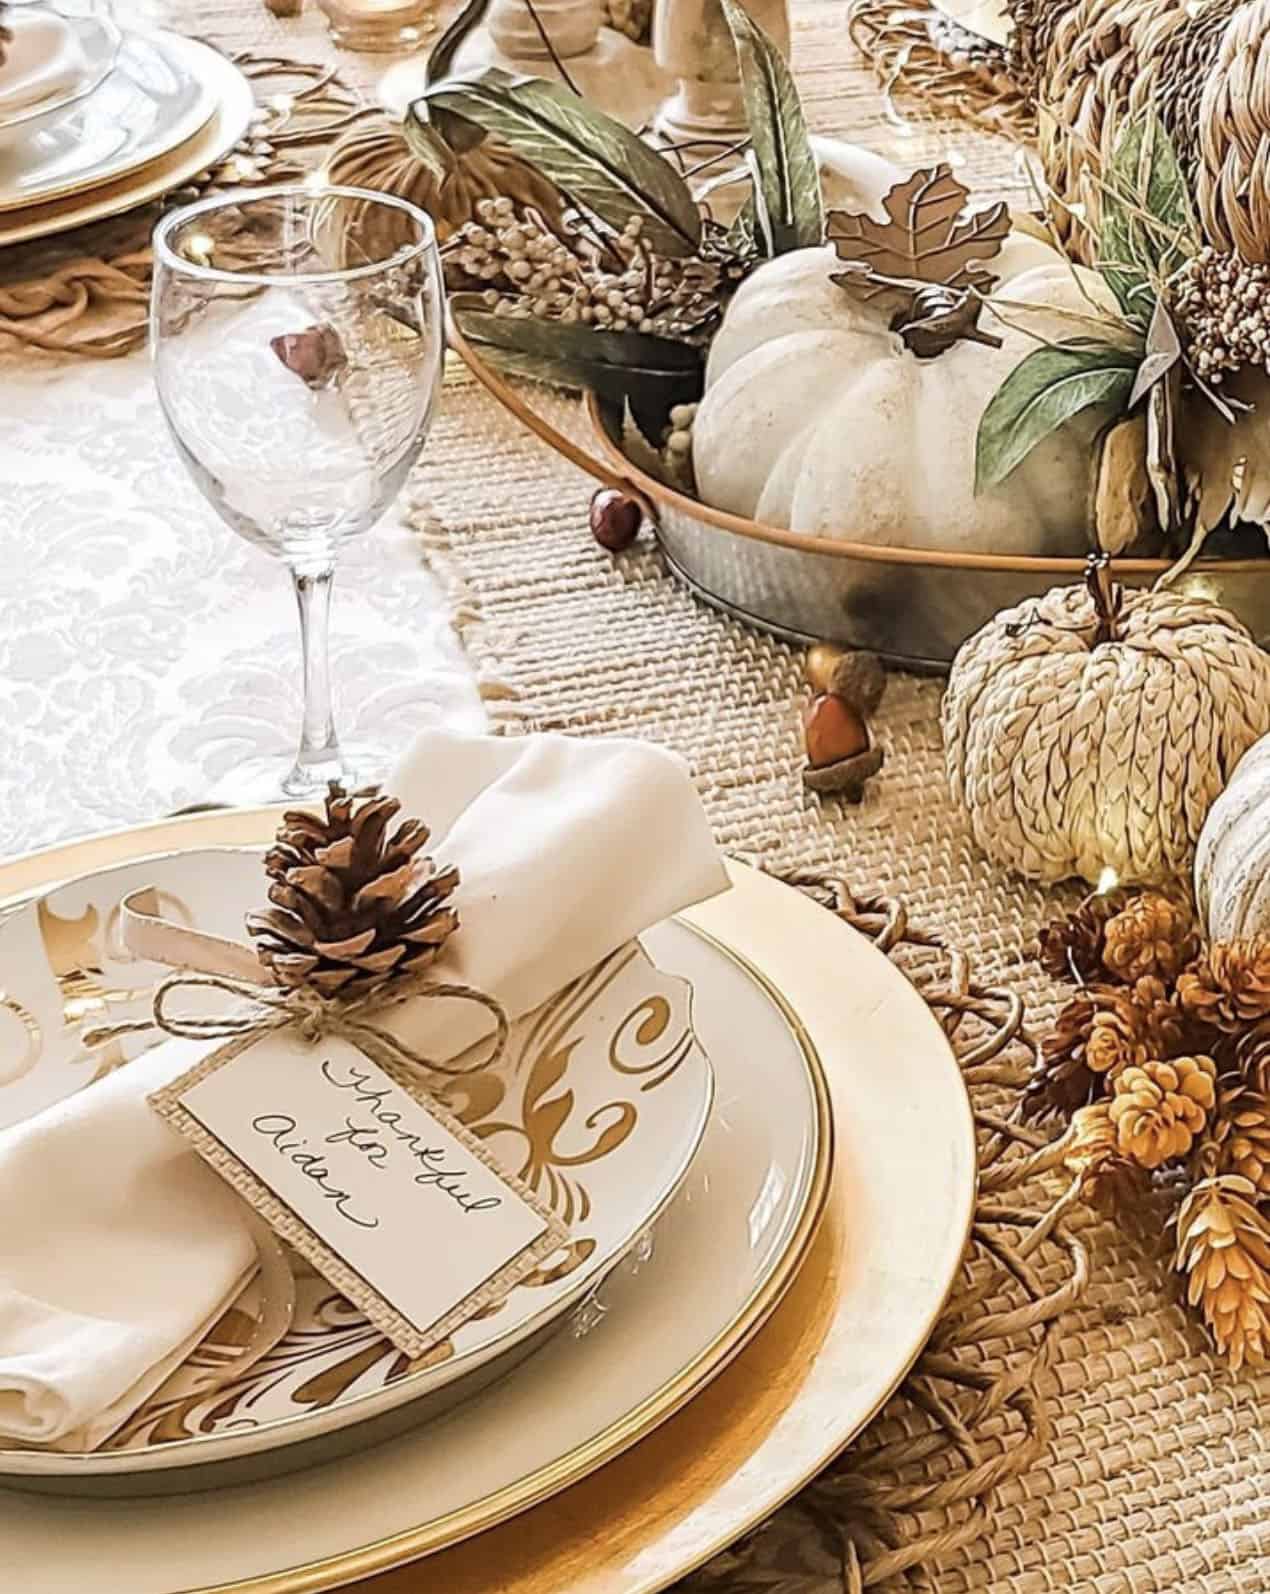 cornucopia-centerpiece-for-thanksgiving-decorated-dining-table